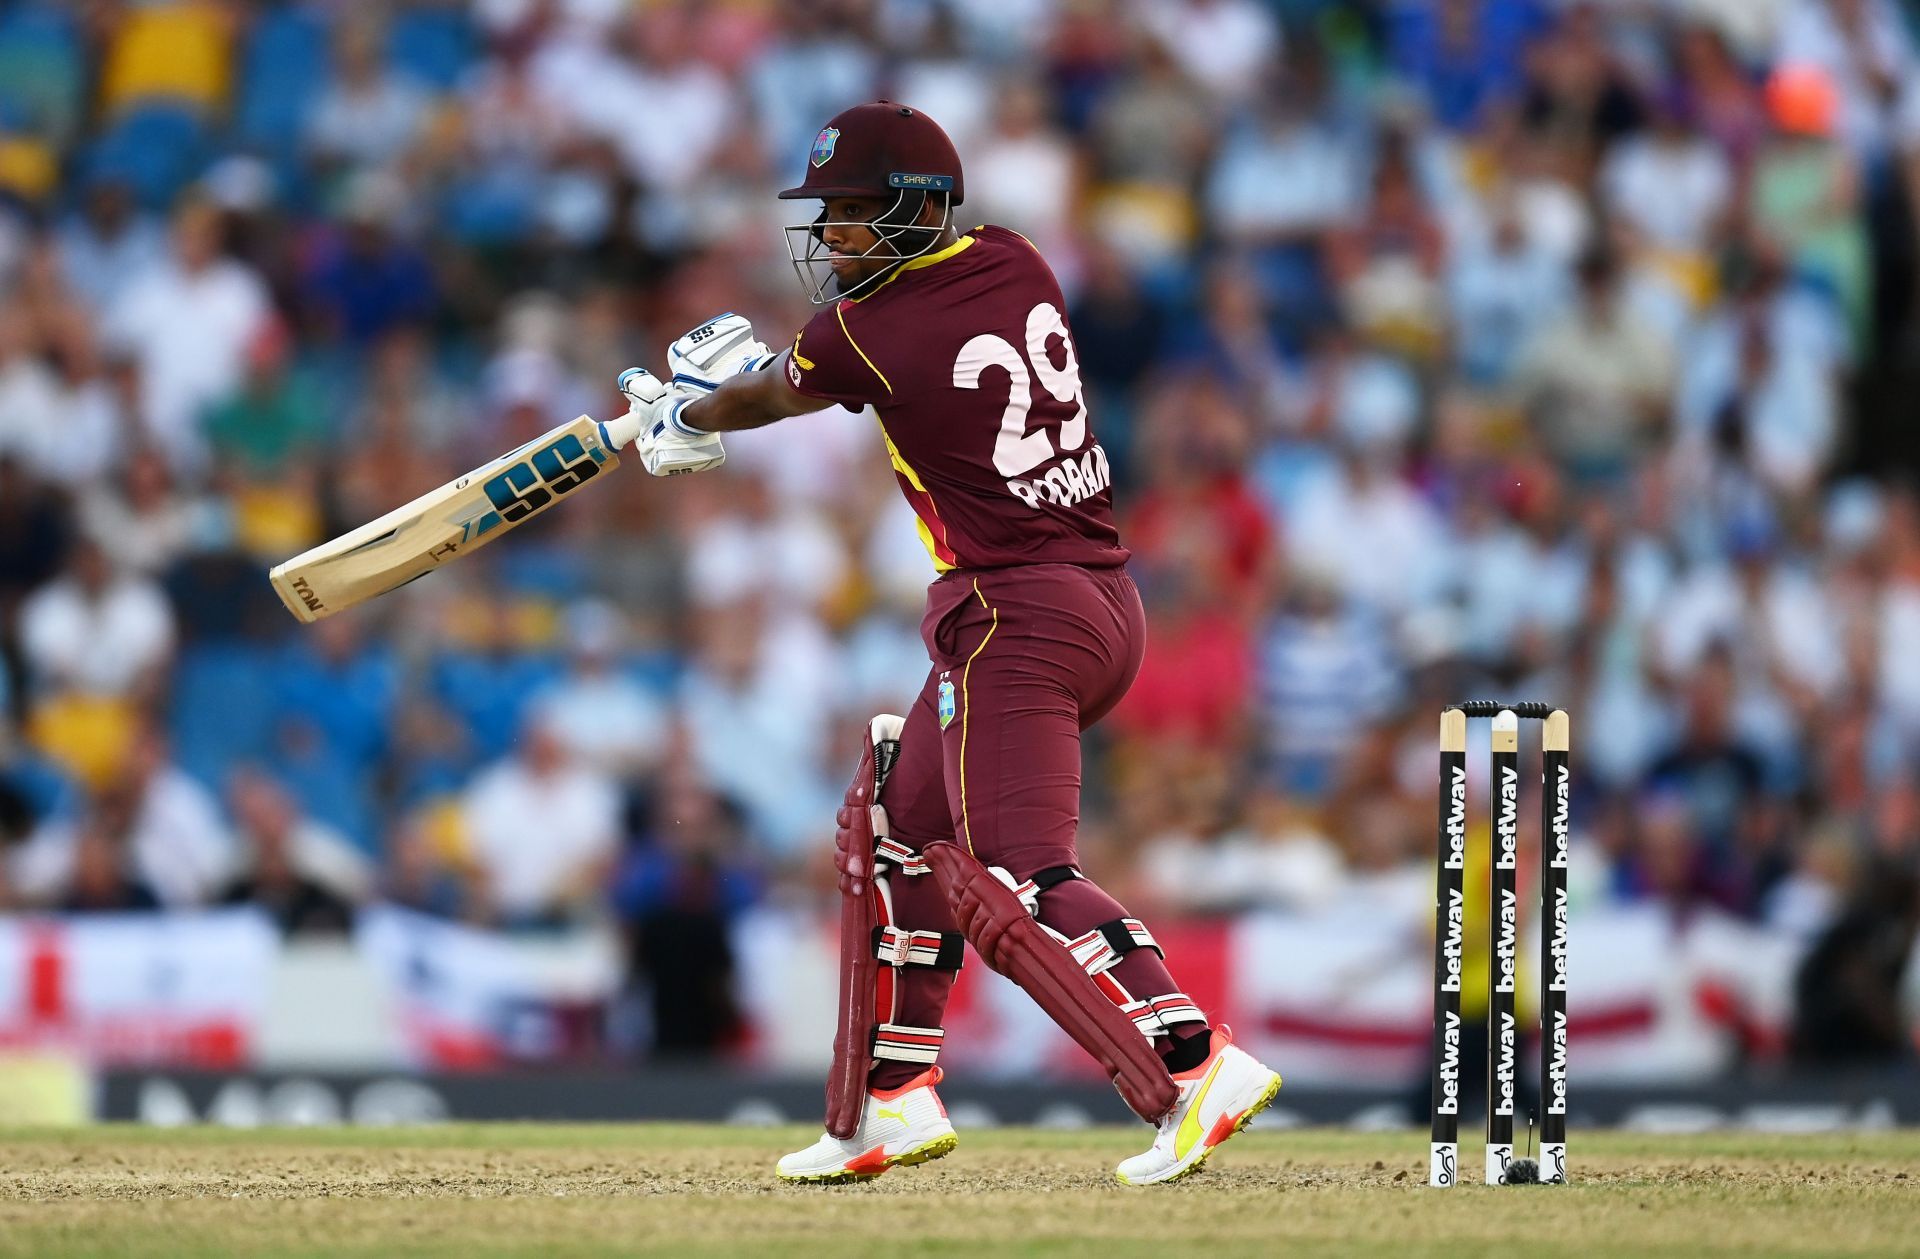 Nicholas Pooran struck six fours and four sixes during his knock.